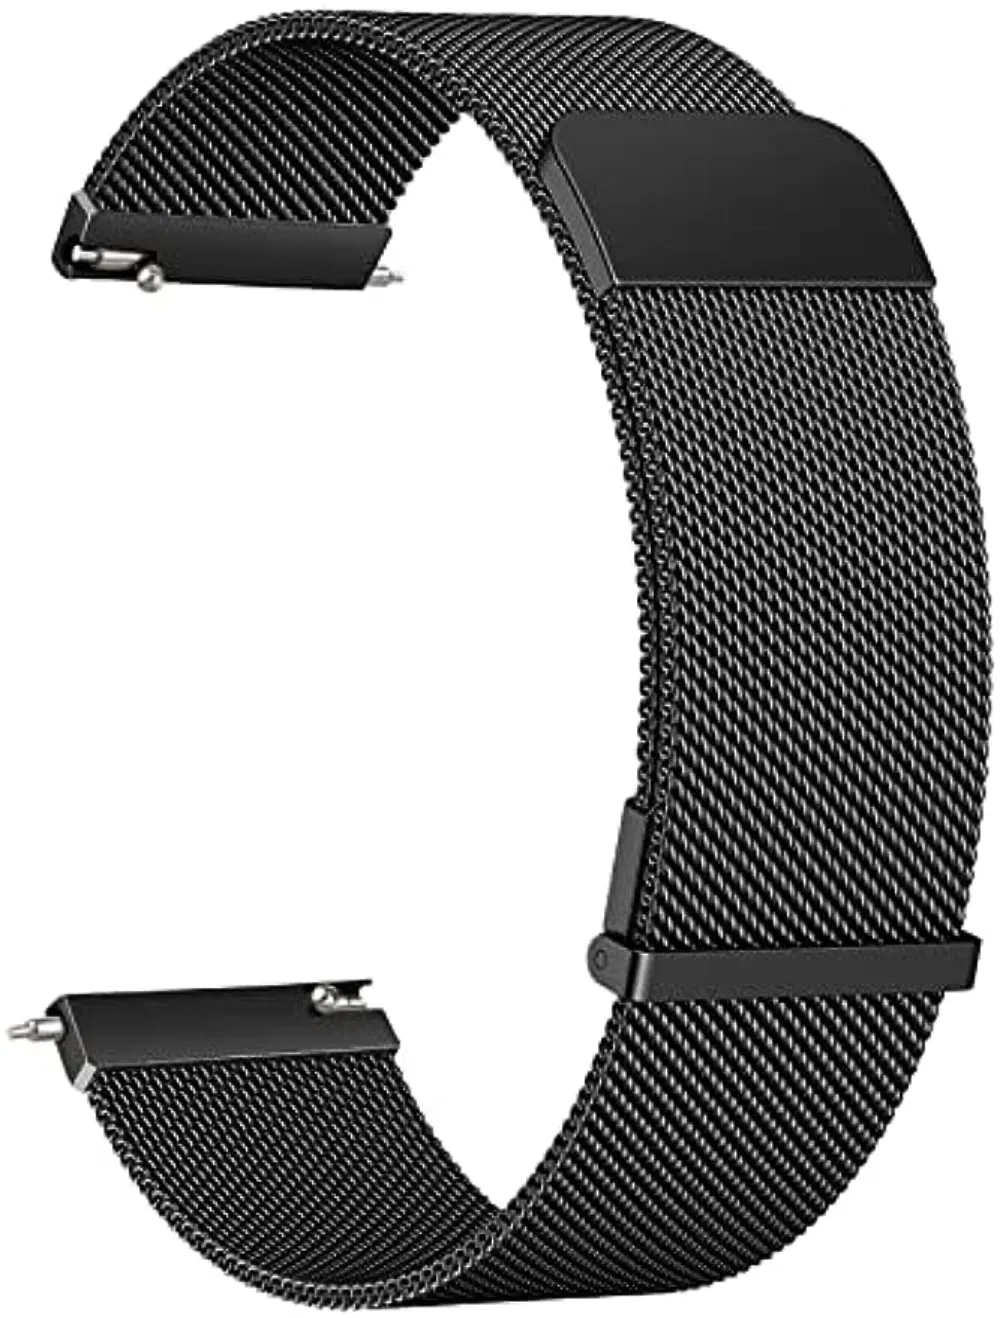 Metal Watch Bands, 20mm 22mm Quick Release Watch Strap, Stainless Steel Mesh Replacement band for Women Men